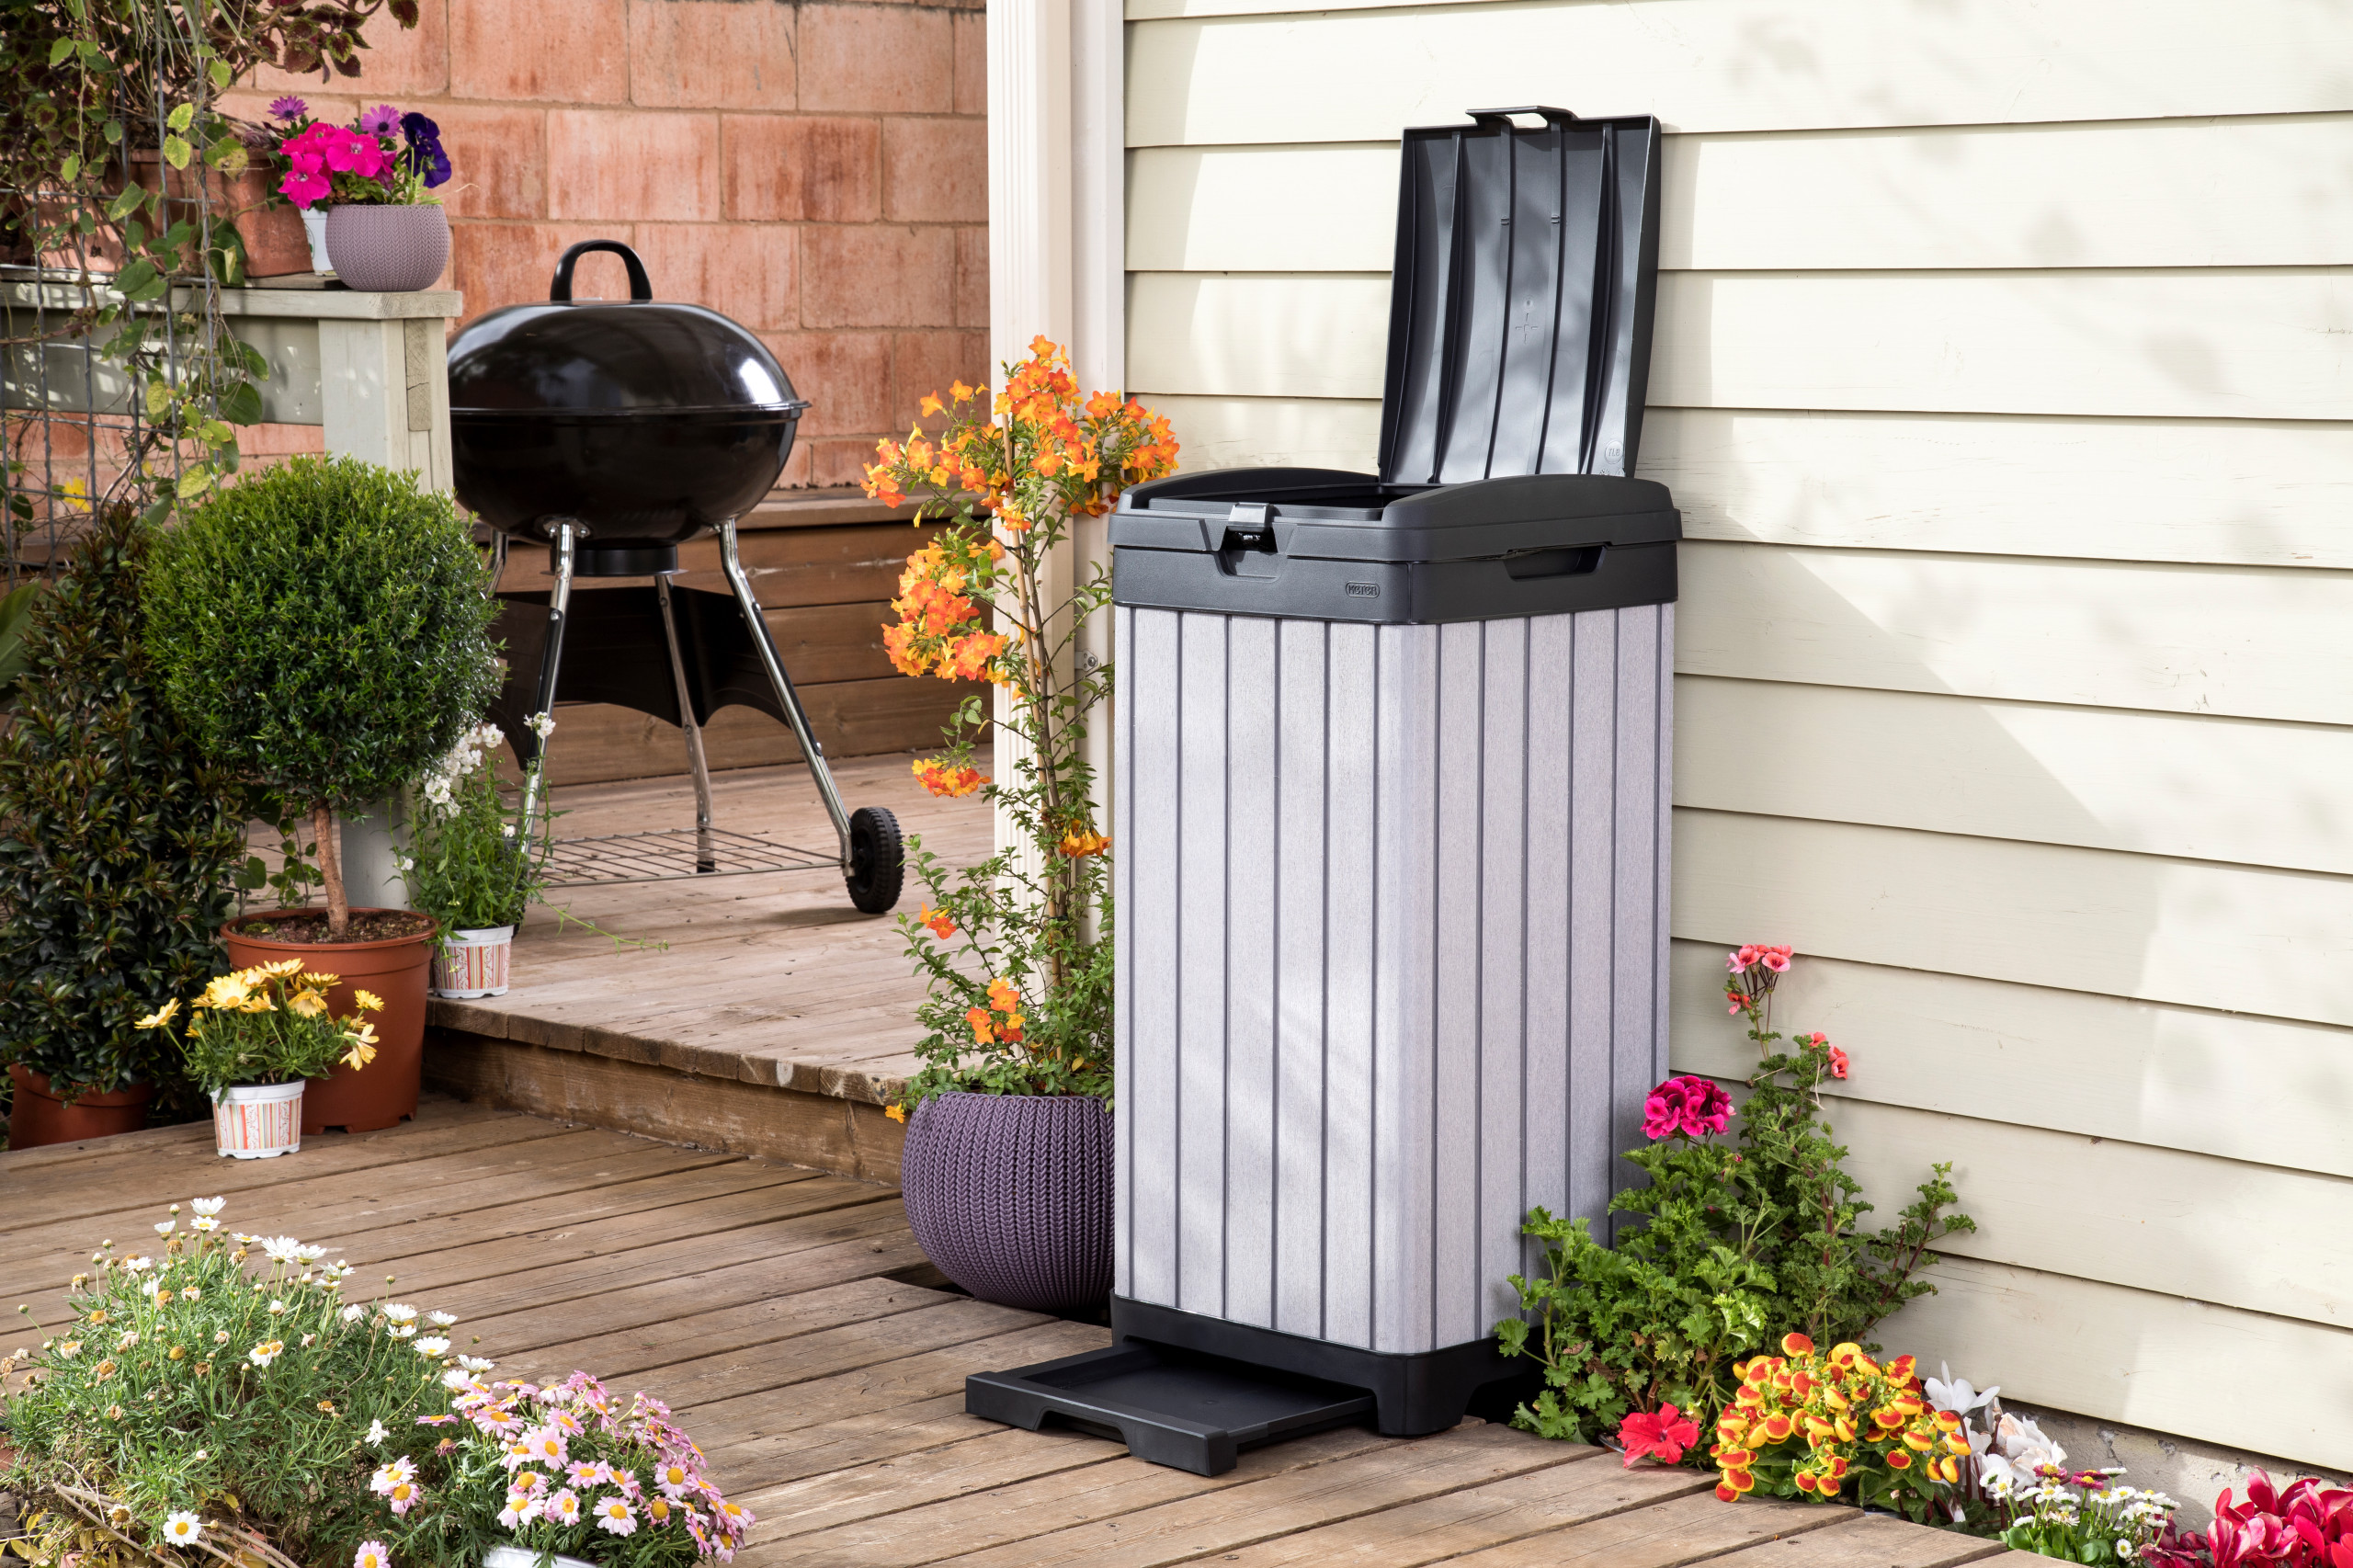 Keter Rockford Duotech Outdoor Plastic Resin Trash Can, Grey - Contemporary  - Patio - Indianapolis - by keter | Houzz